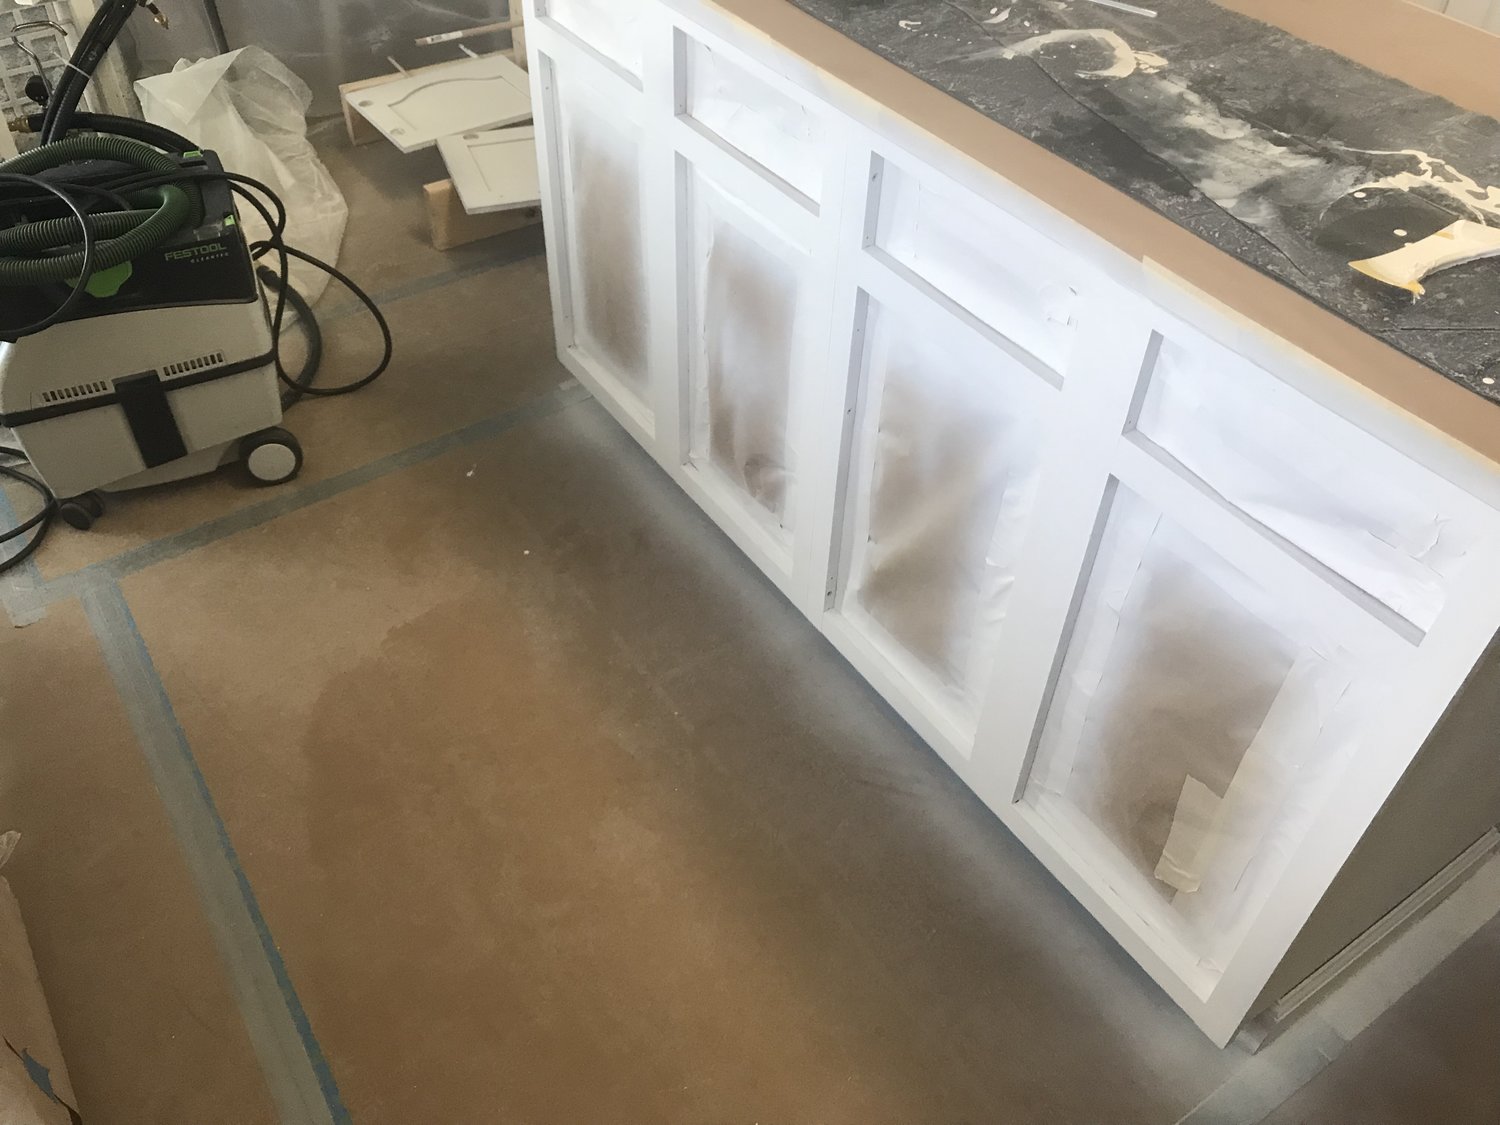 Painting Cabinets In Scranton Pa Remodeling Contractor Cabinet